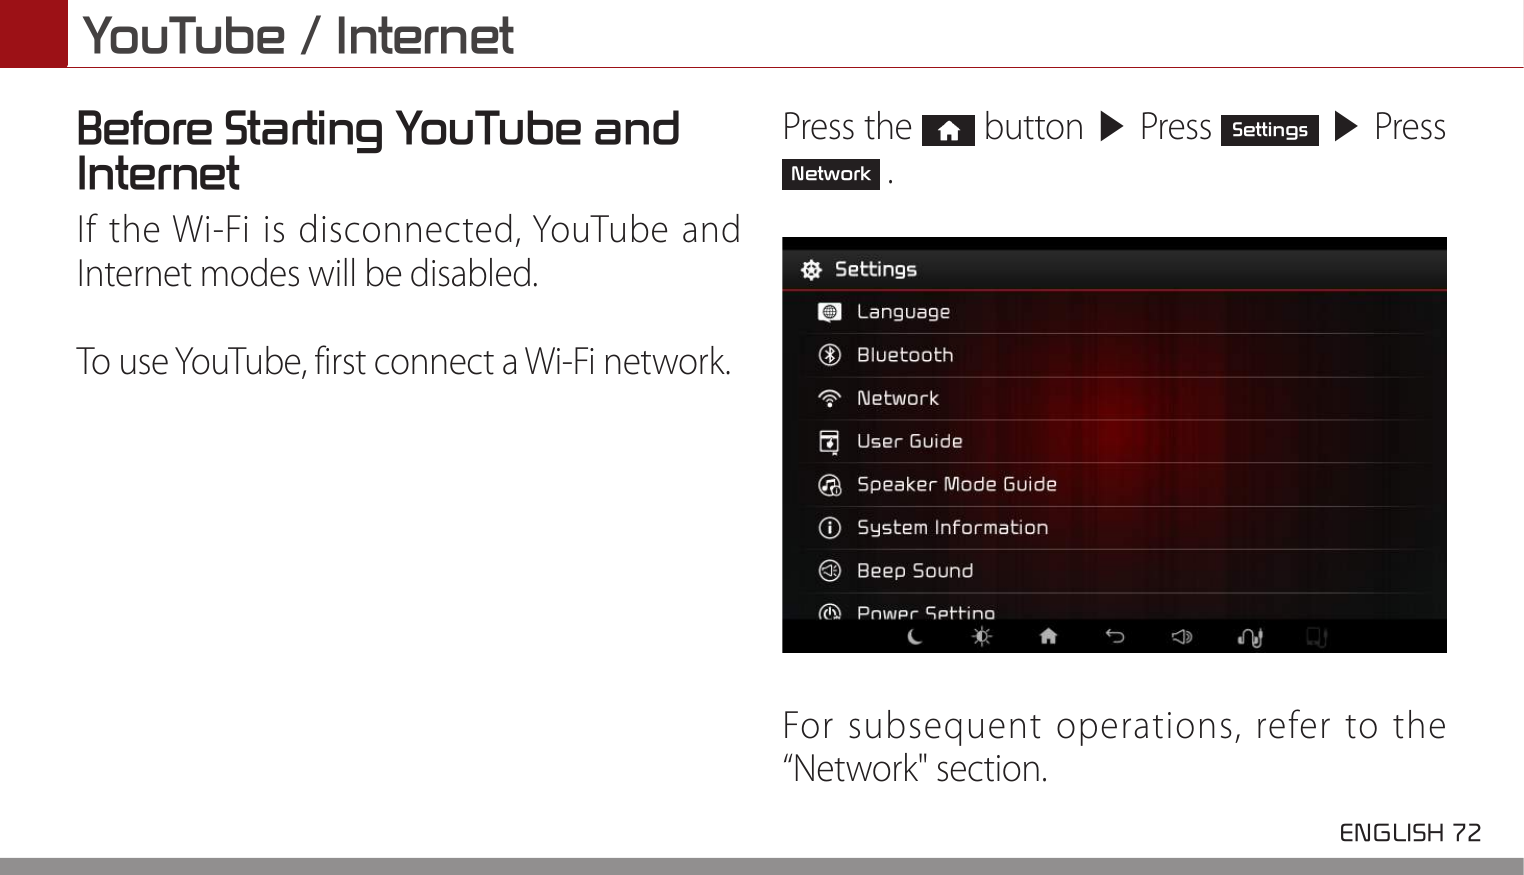 YouTube / Internet ENGLISH 72 Before Starting YouTube and Internet If the Wi-Fi is disconnected, YouTube and Internet modes will be disabled.To use YouTube, first connect a Wi-Fi network.Press the   button ▶ Press Settings ▶ Press Network .For subsequent operations, refer to the “Network&quot; section.